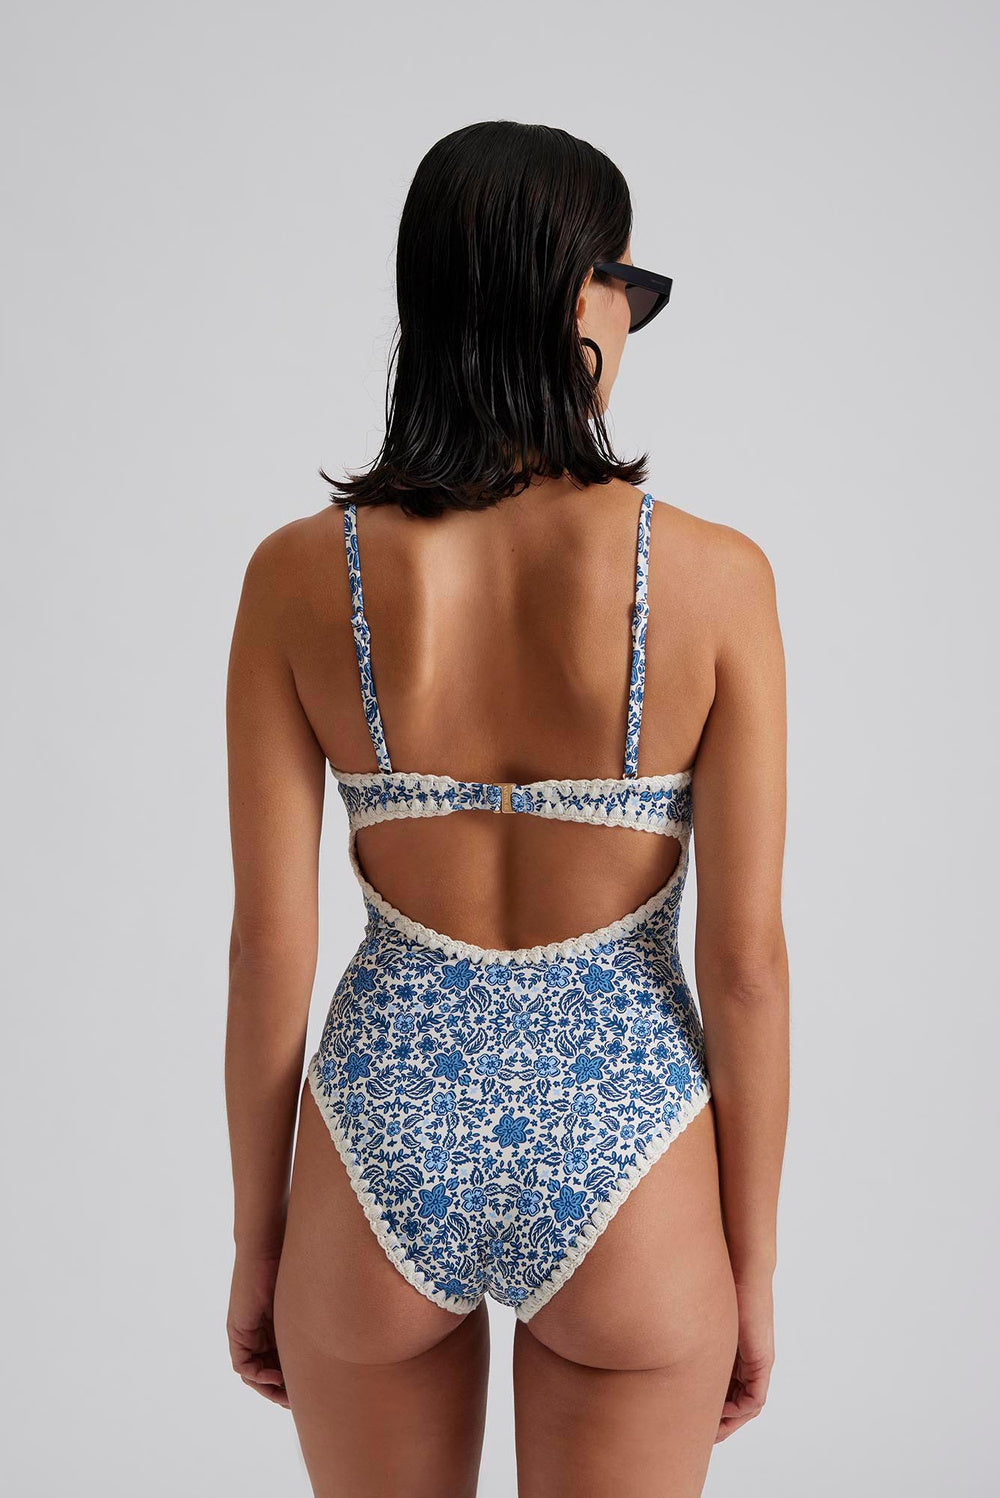 Blue and white floral swimming costume with thin straps crotched trim and open back